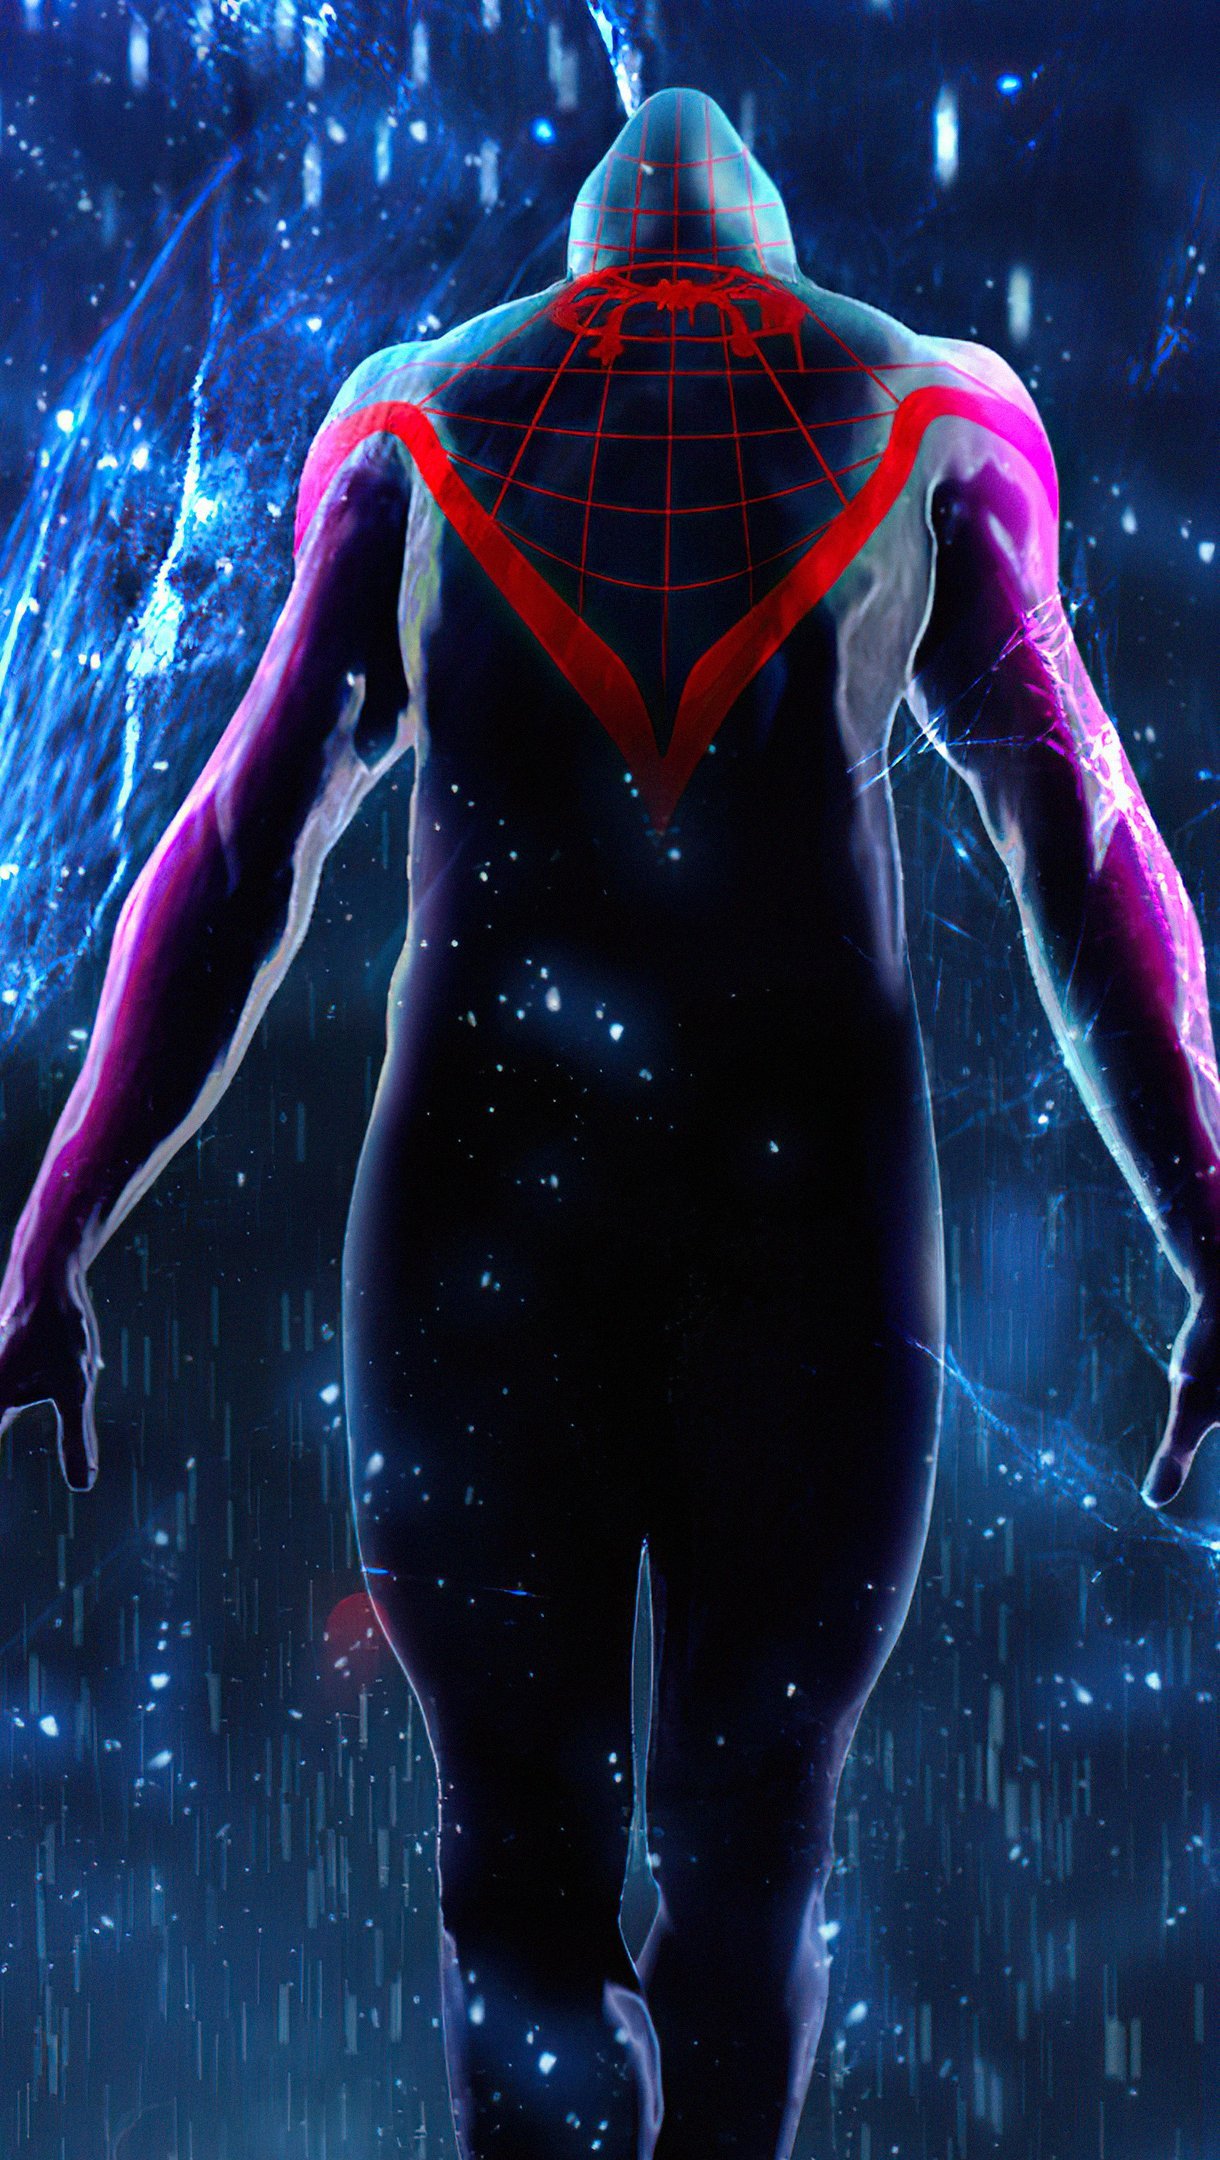 Spider Man Into the Spider Verse Wallpaper 4k Ultra HD ID:10399